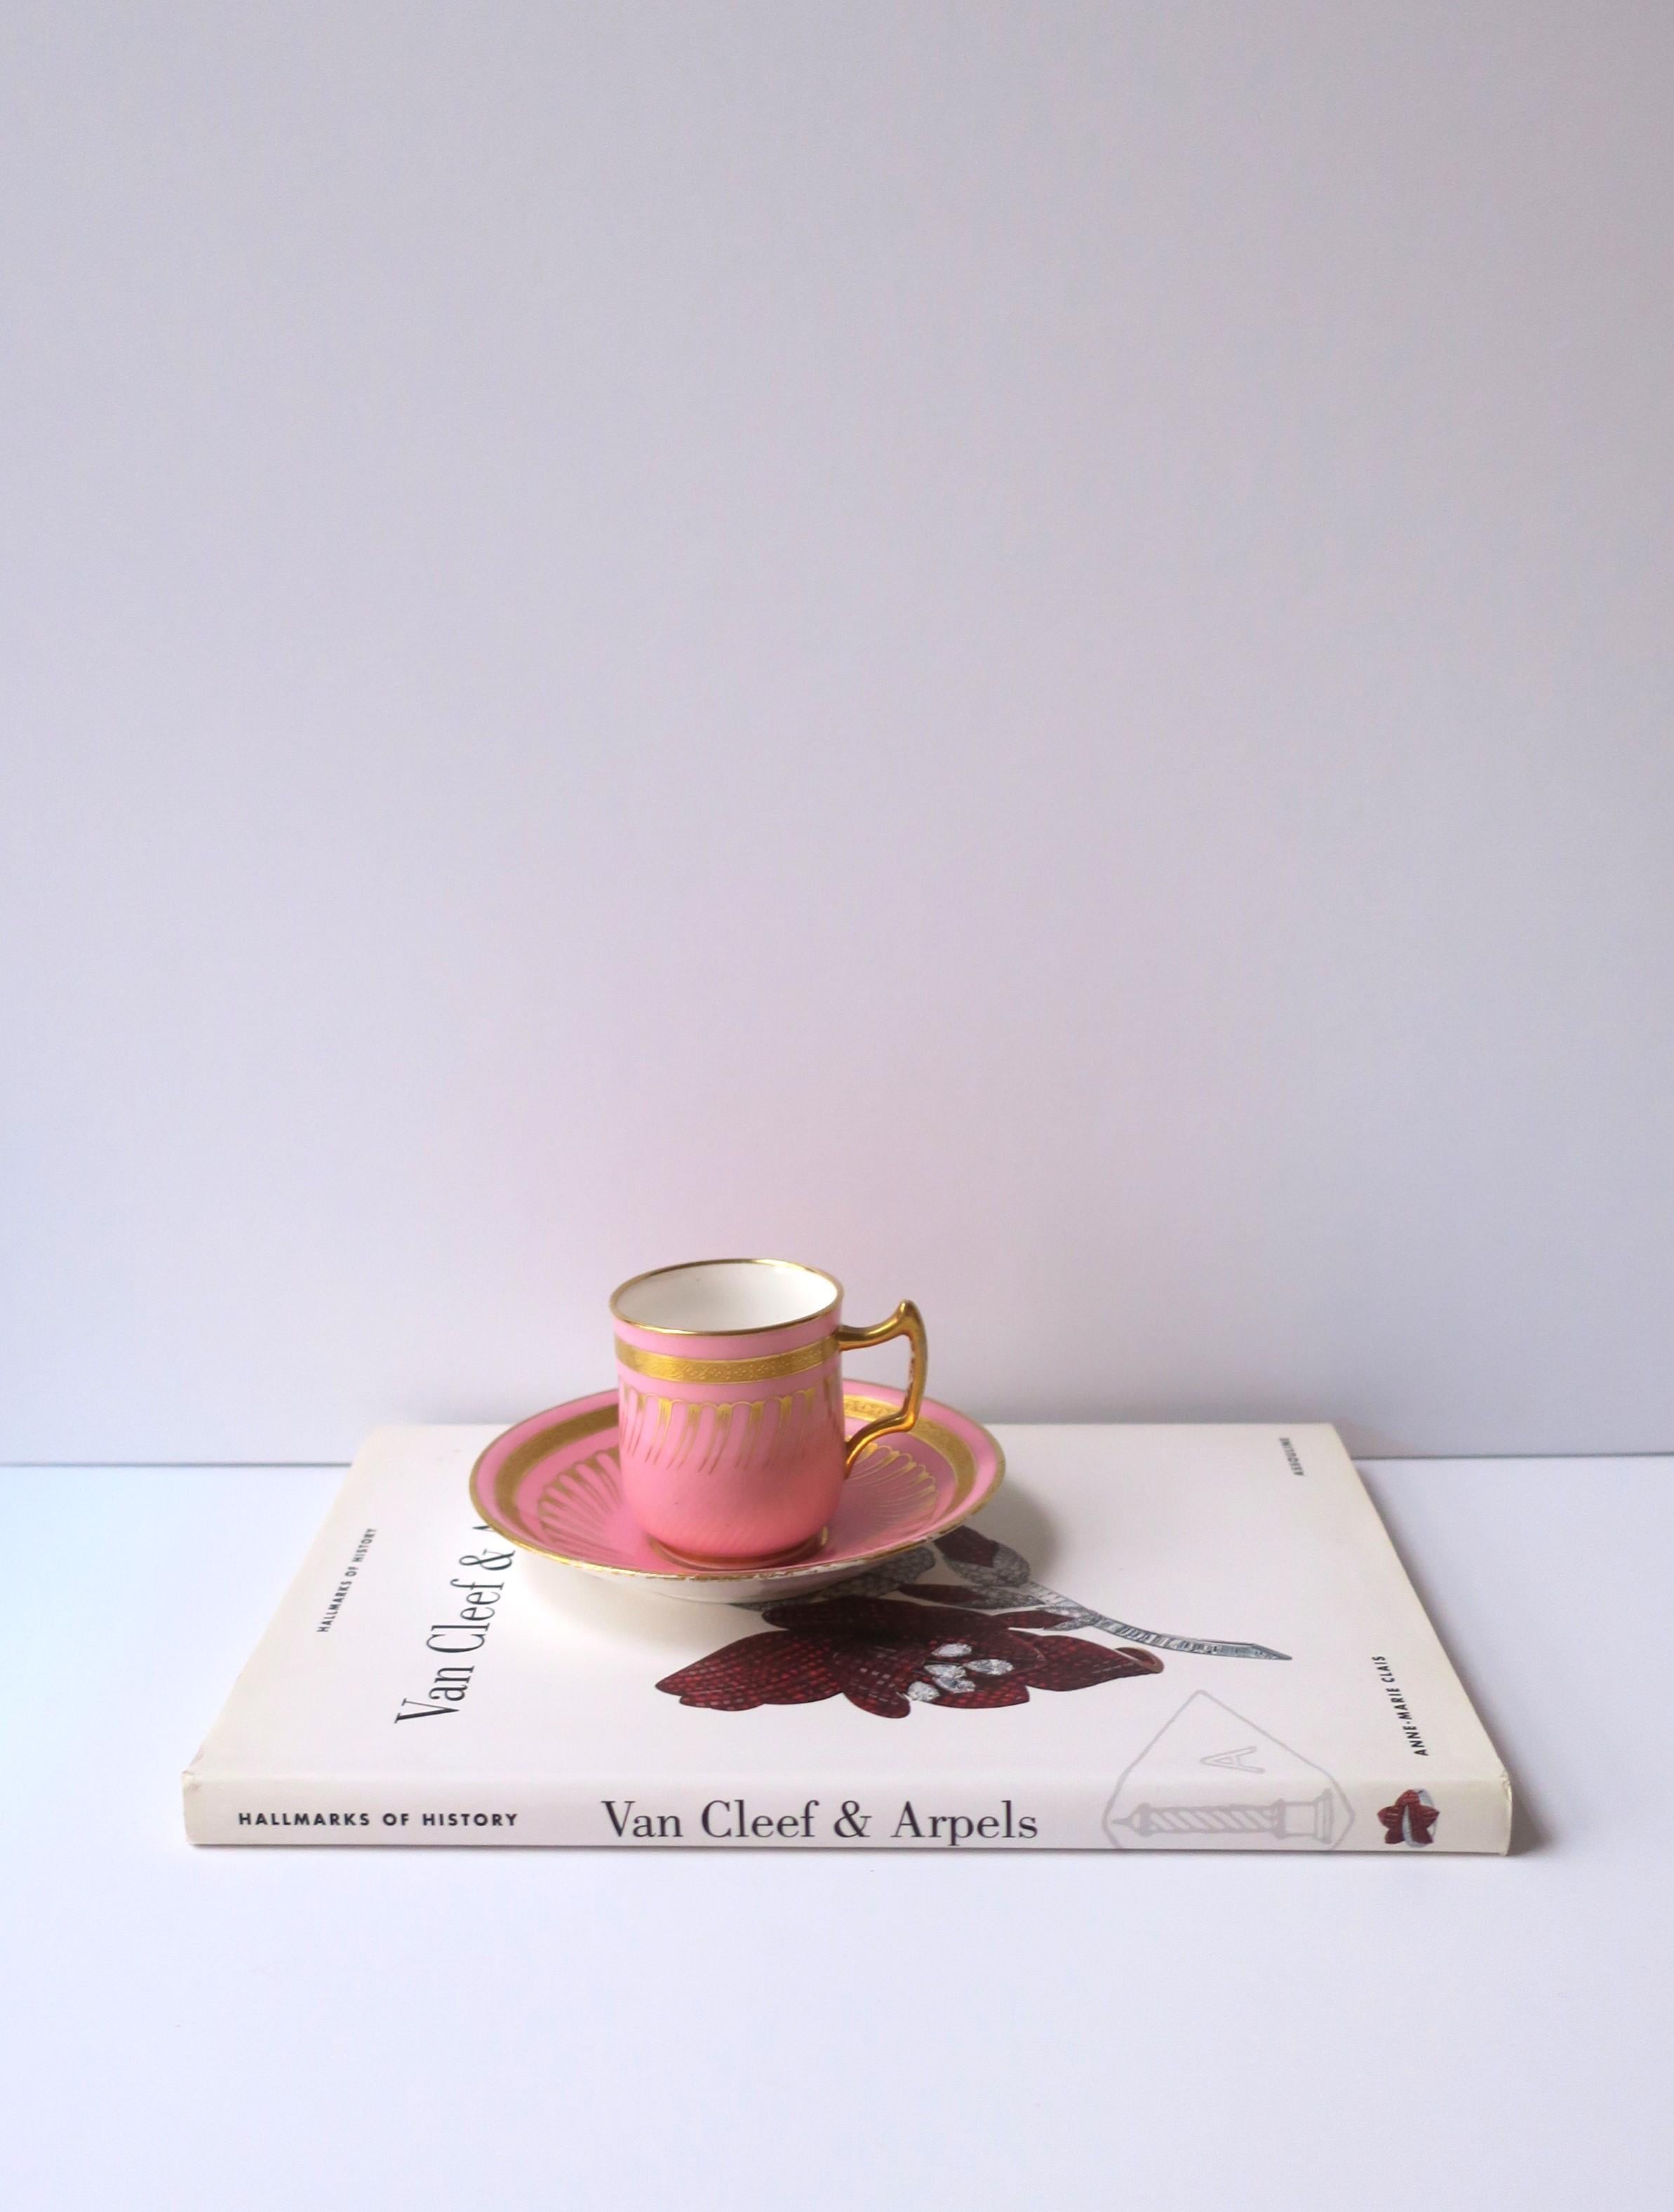 Glazed English Minton Pink & Gold Porcelain Coffee Espresso Cup & Saucer, 19th century For Sale